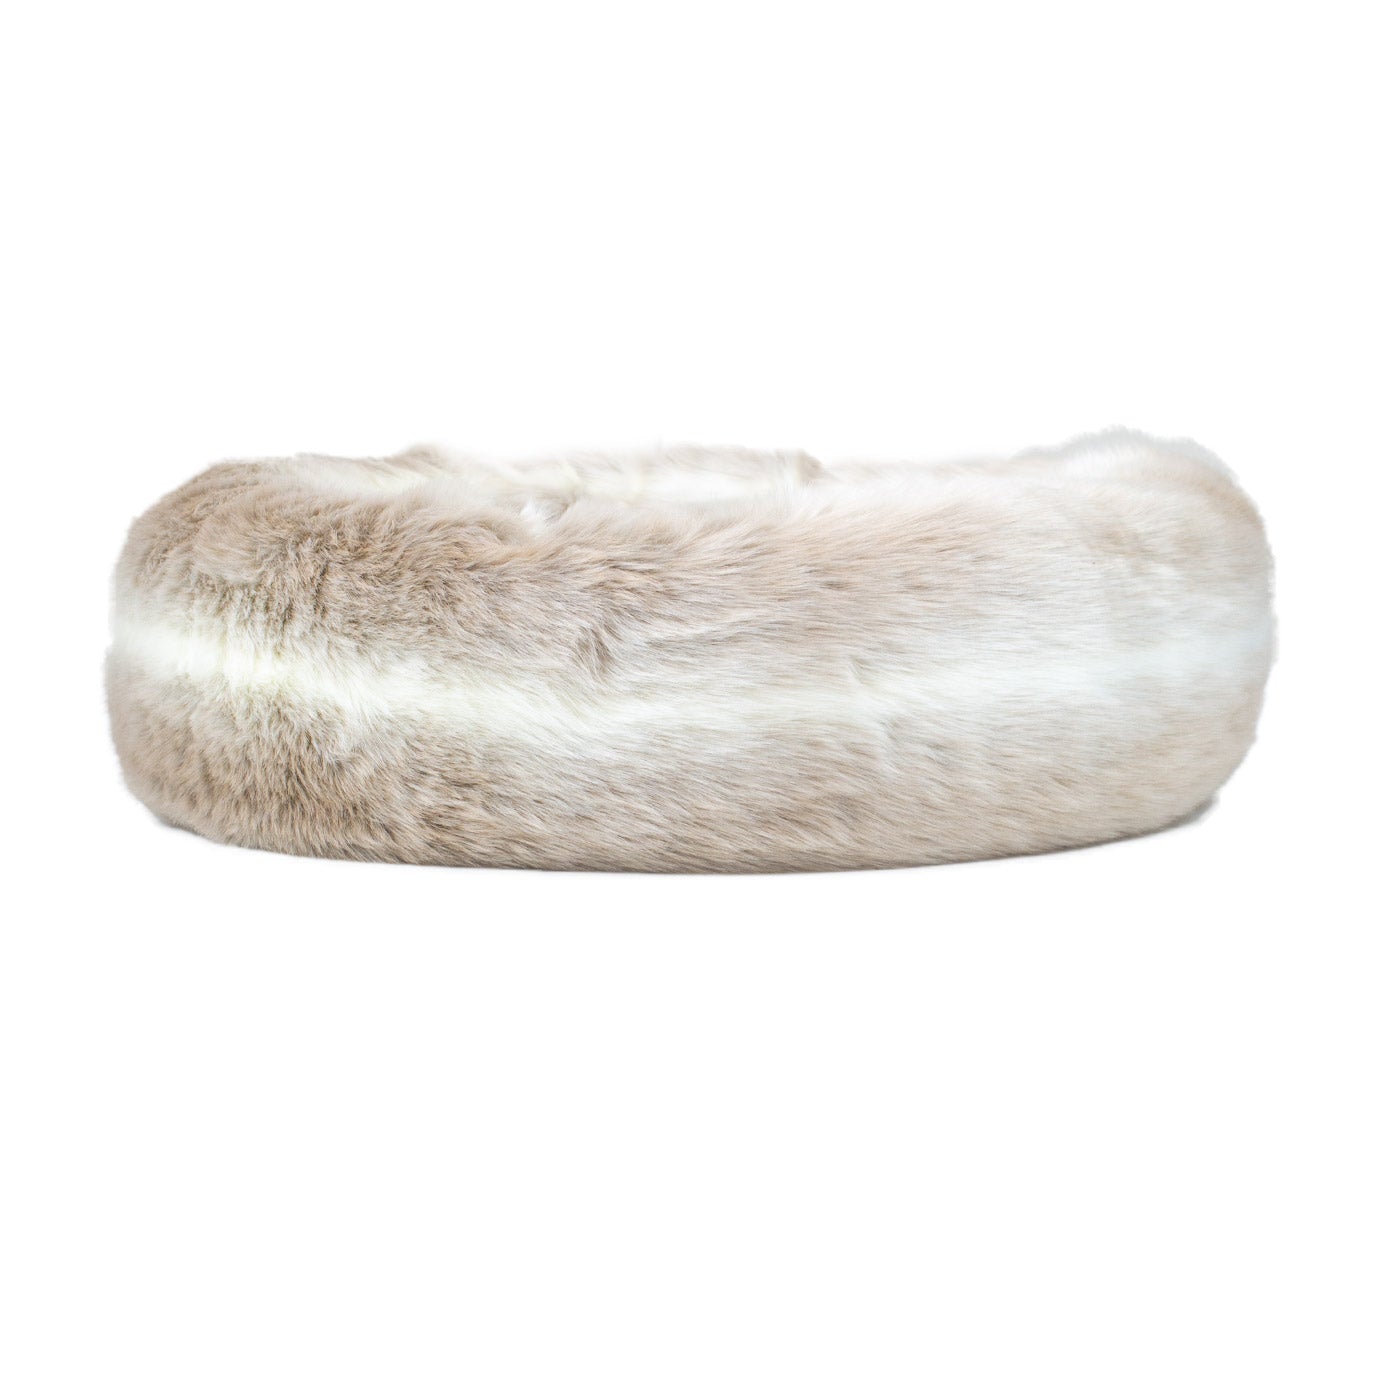 Luxury Anti-Anxiety Dog Bed, In Stunning Reindeer Faux Fur, Perfect For Your Pets Nap Time! Available Now at Lords & Labradors US